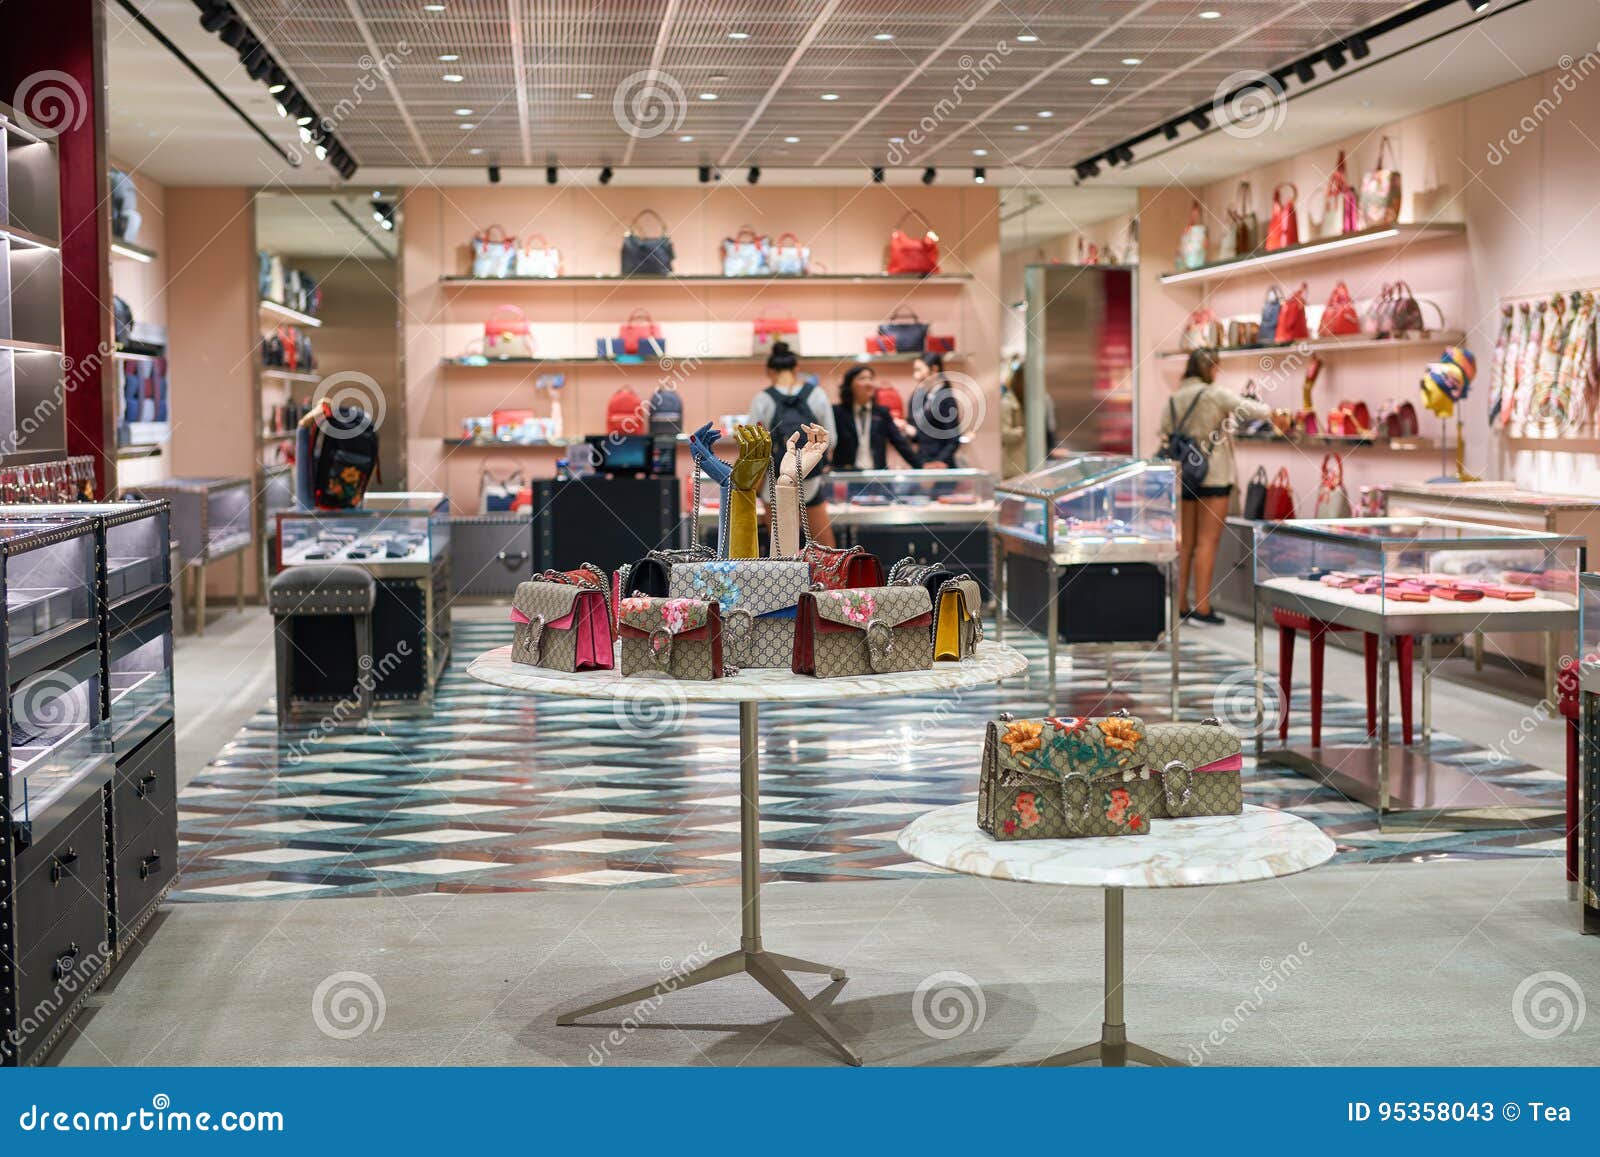 A Store at Singapore Changi Airport Editorial Stock Photo - Image of ...